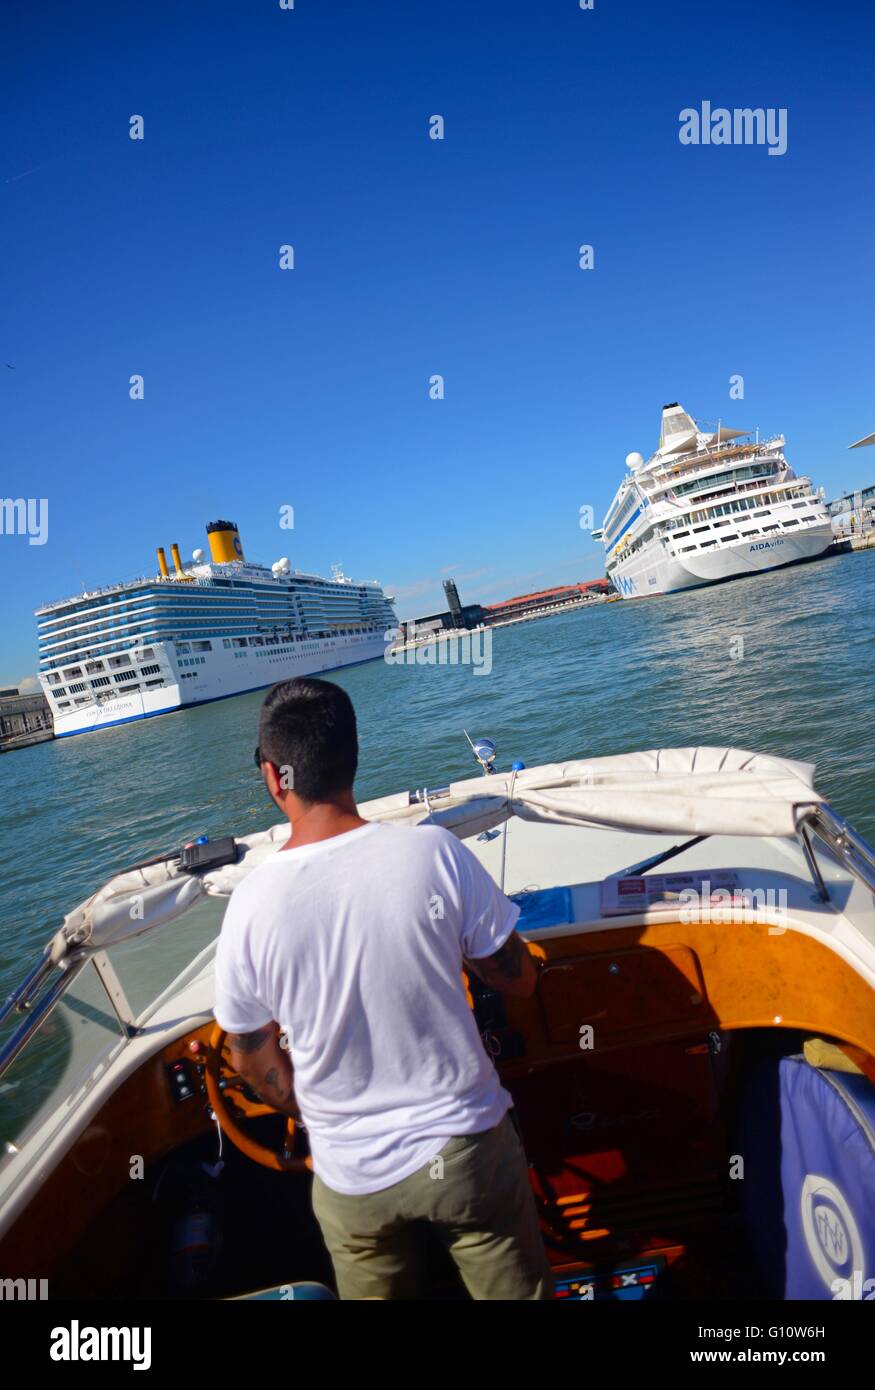 Arriving on taxi boat to the Maritime Station, where cruise ships are moored, Venice, Italy Stock Photo